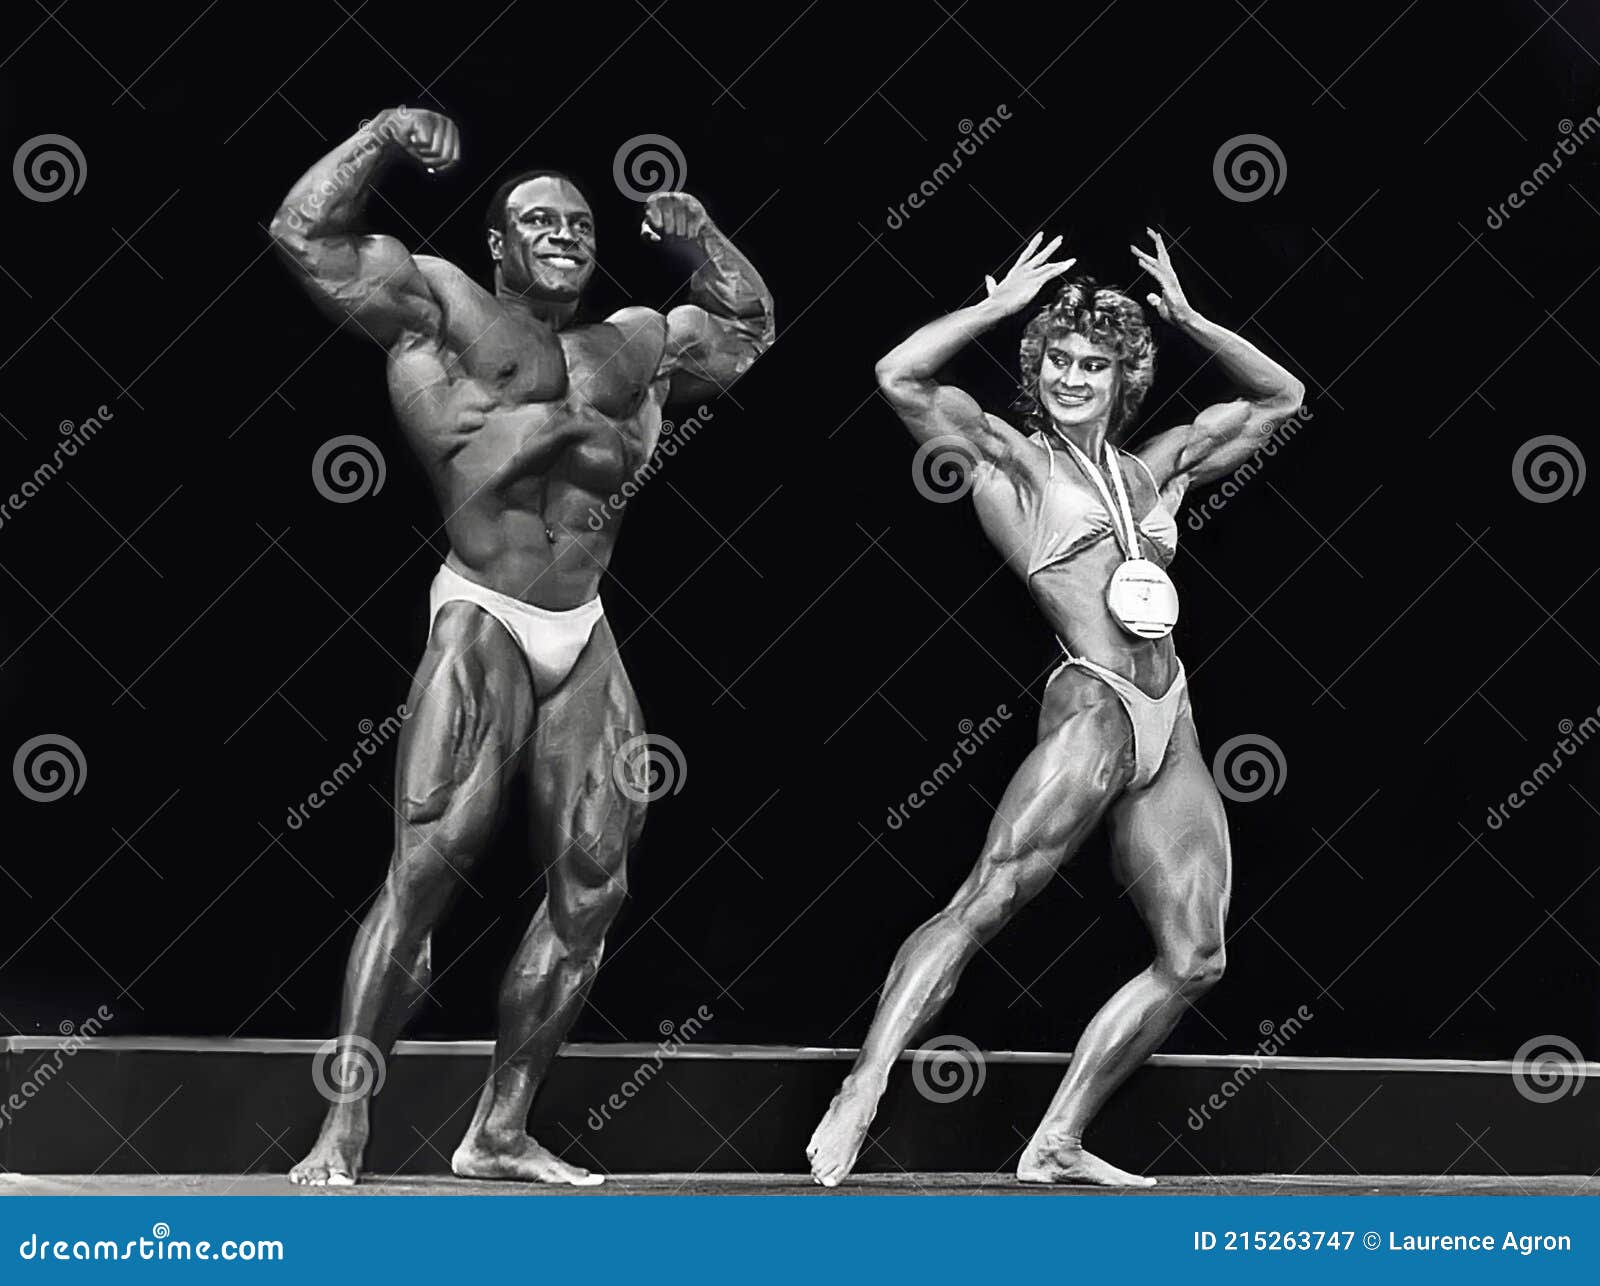 mr olympia lee haney ms corey everson pose montreal reigning ifbb surprises fans joining newly crowned as show off 215263747